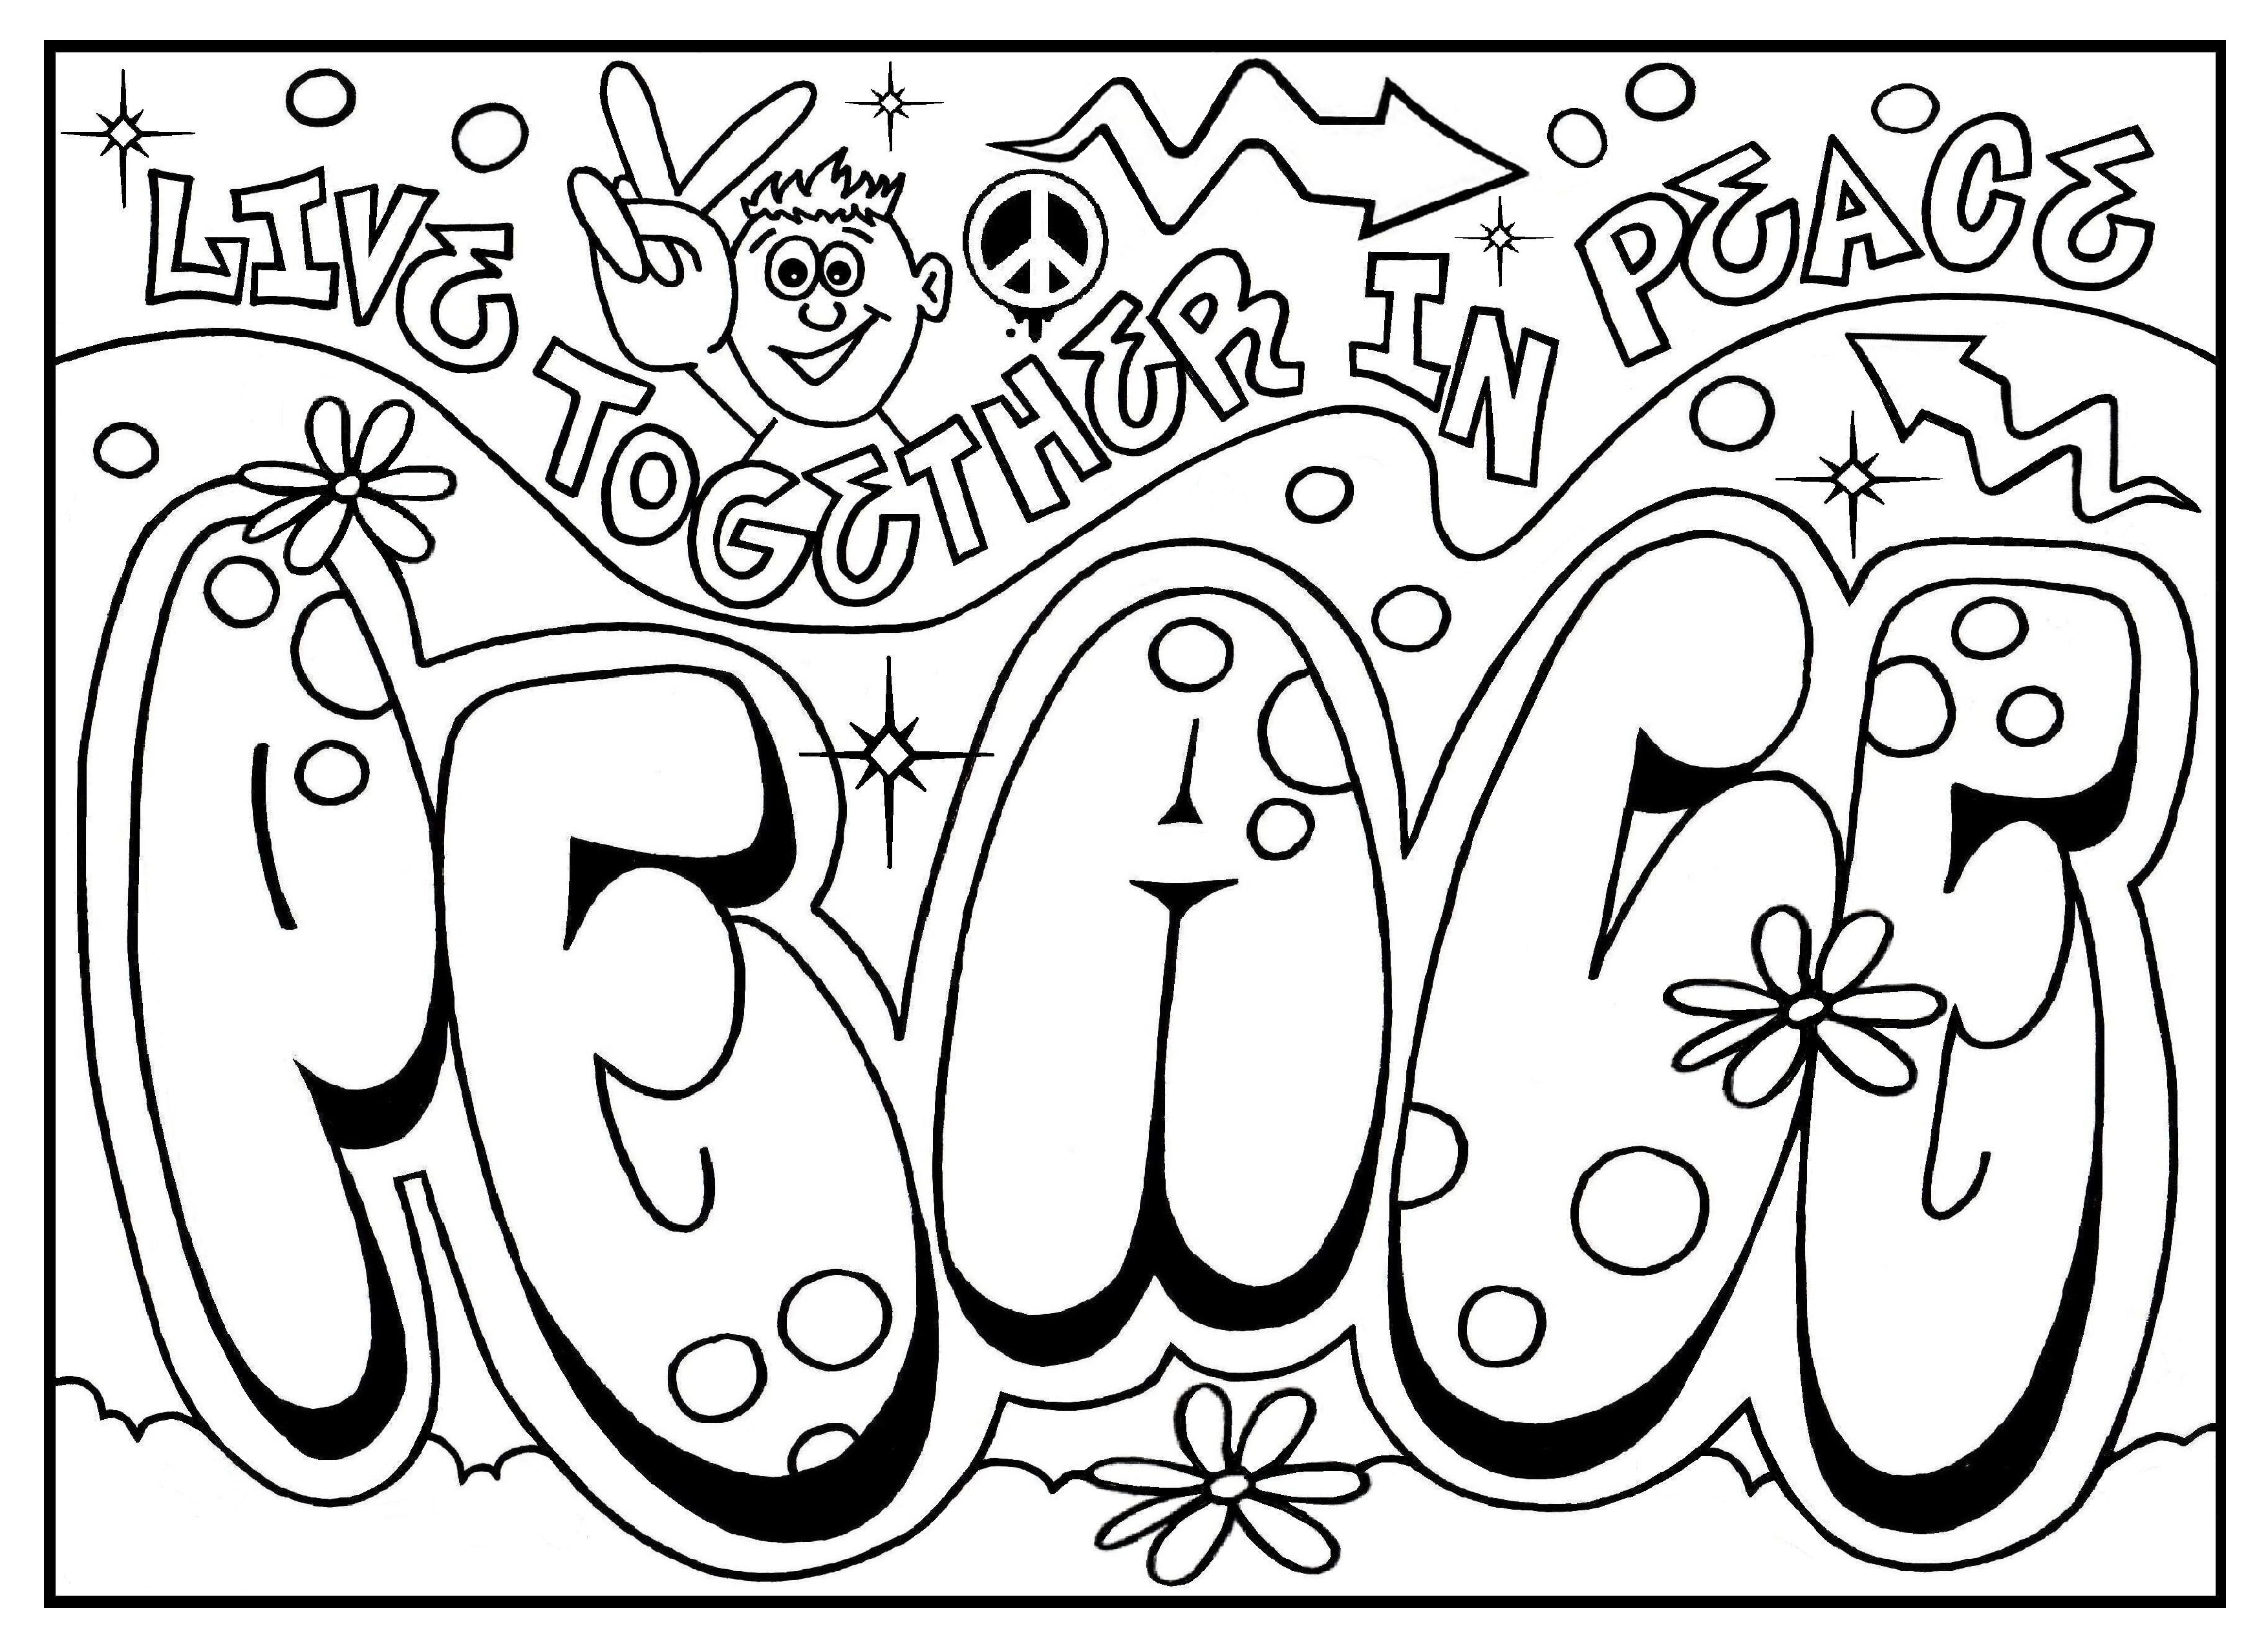 Graffiti Coloring Pages for Teens and Adults Best Coloring Pages For Kids